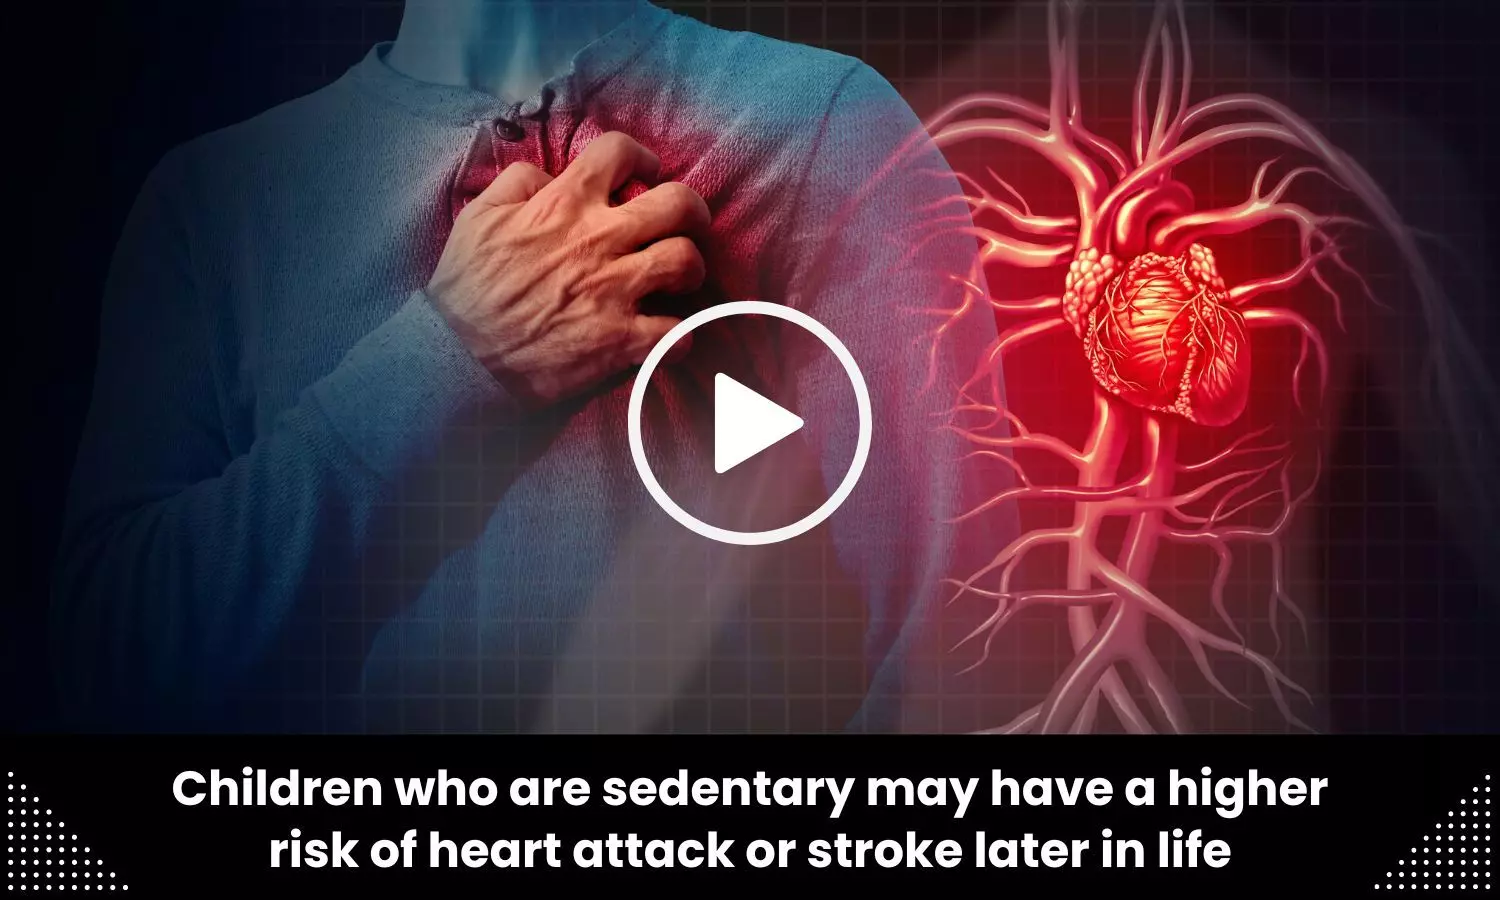 Children who are sedentary may have a higher risk of heart attack or stroke later in life